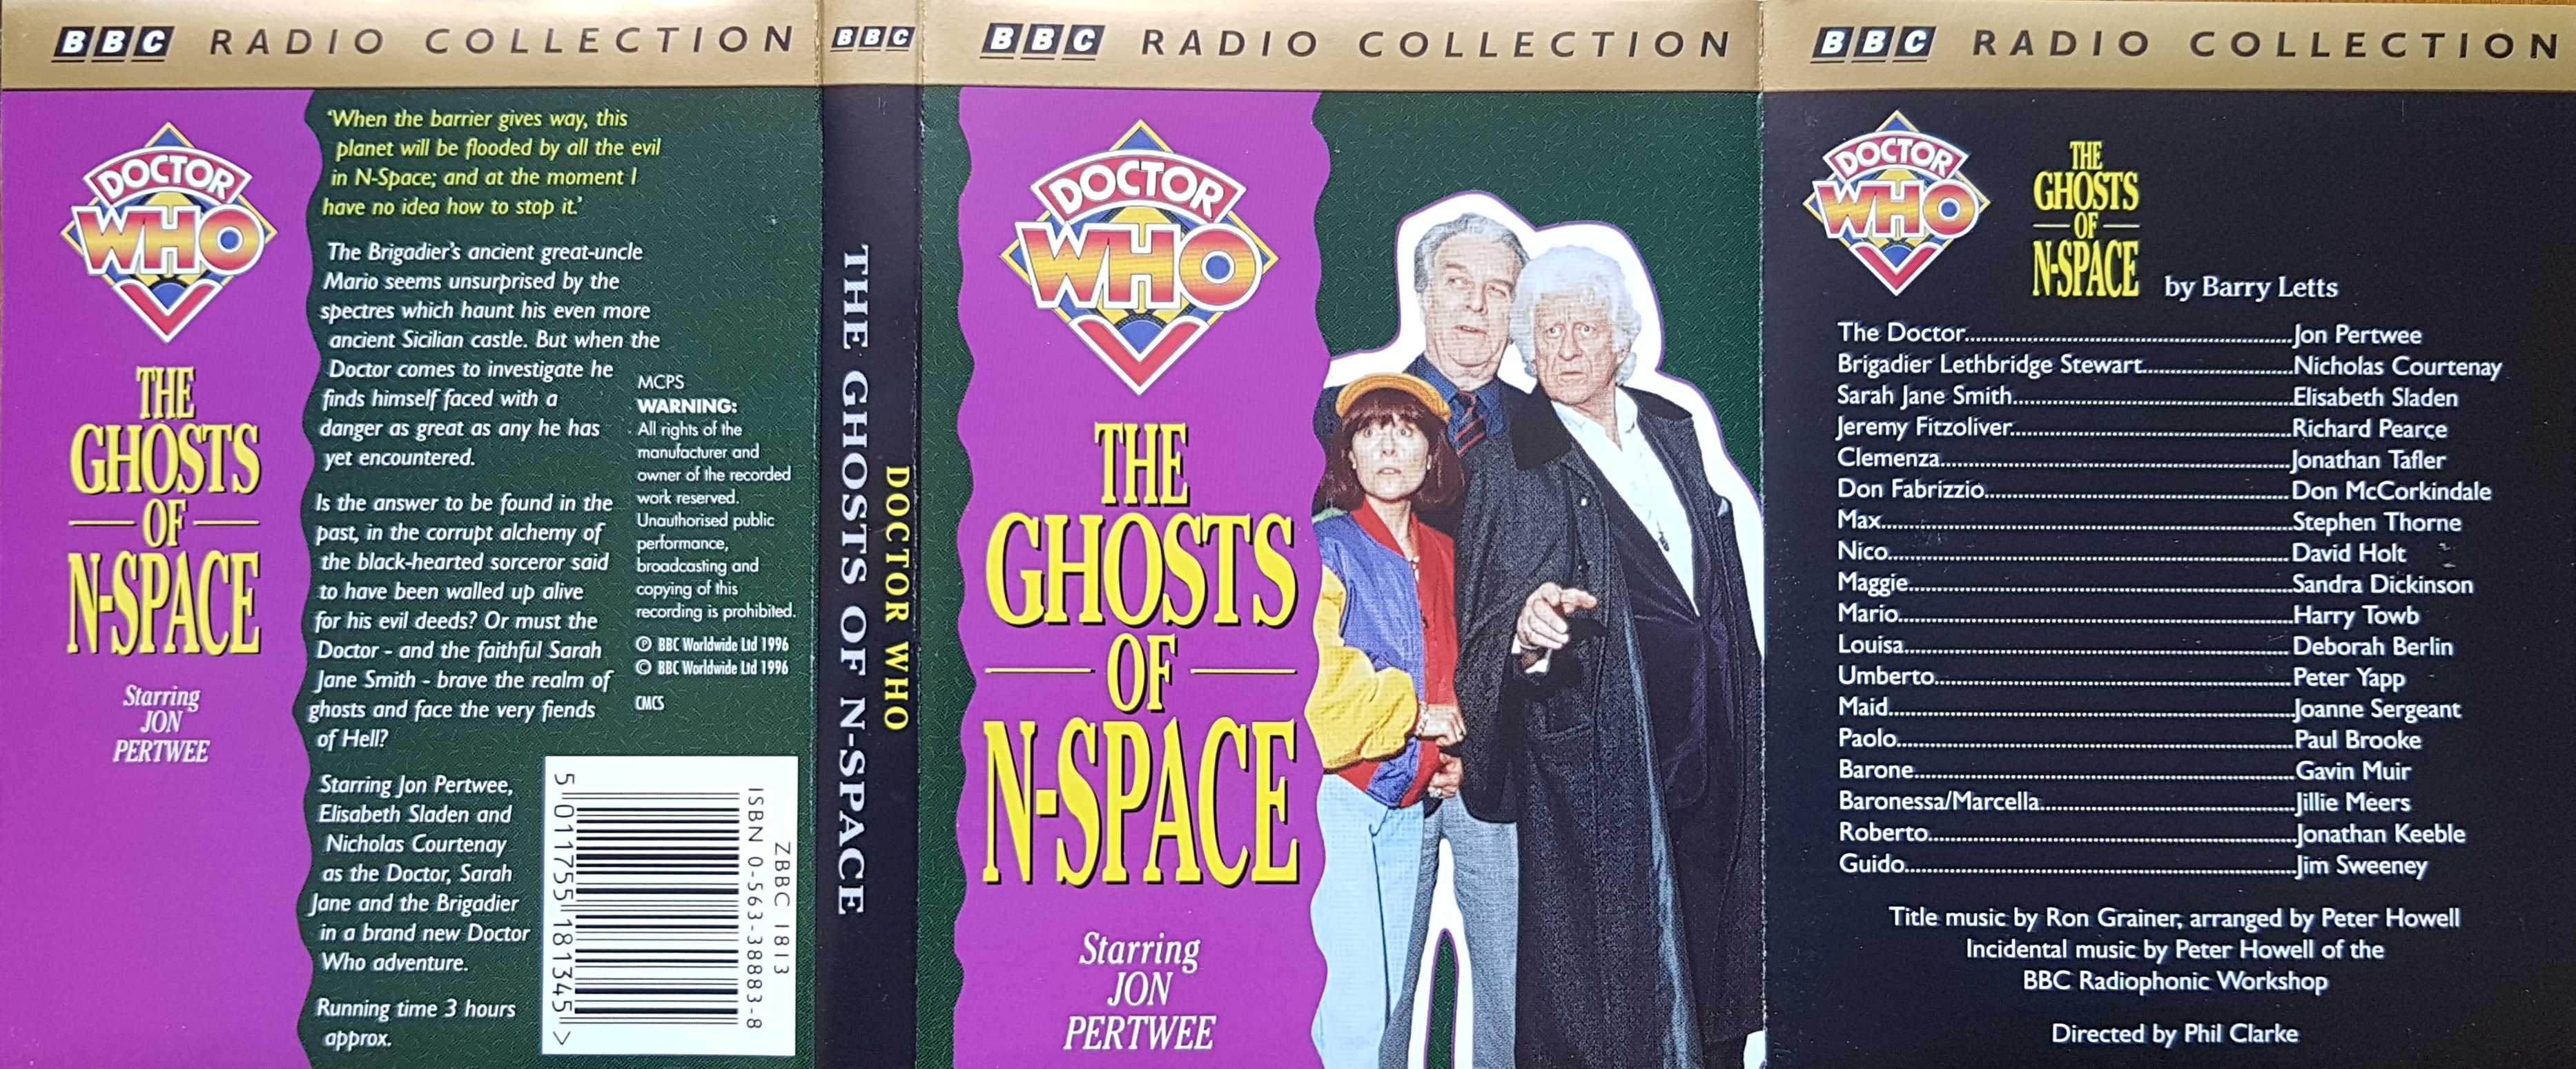 Picture of ZBBC 1813 Doctor Who - The ghosts of 'n' space by artist Barry Letts from the BBC records and Tapes library